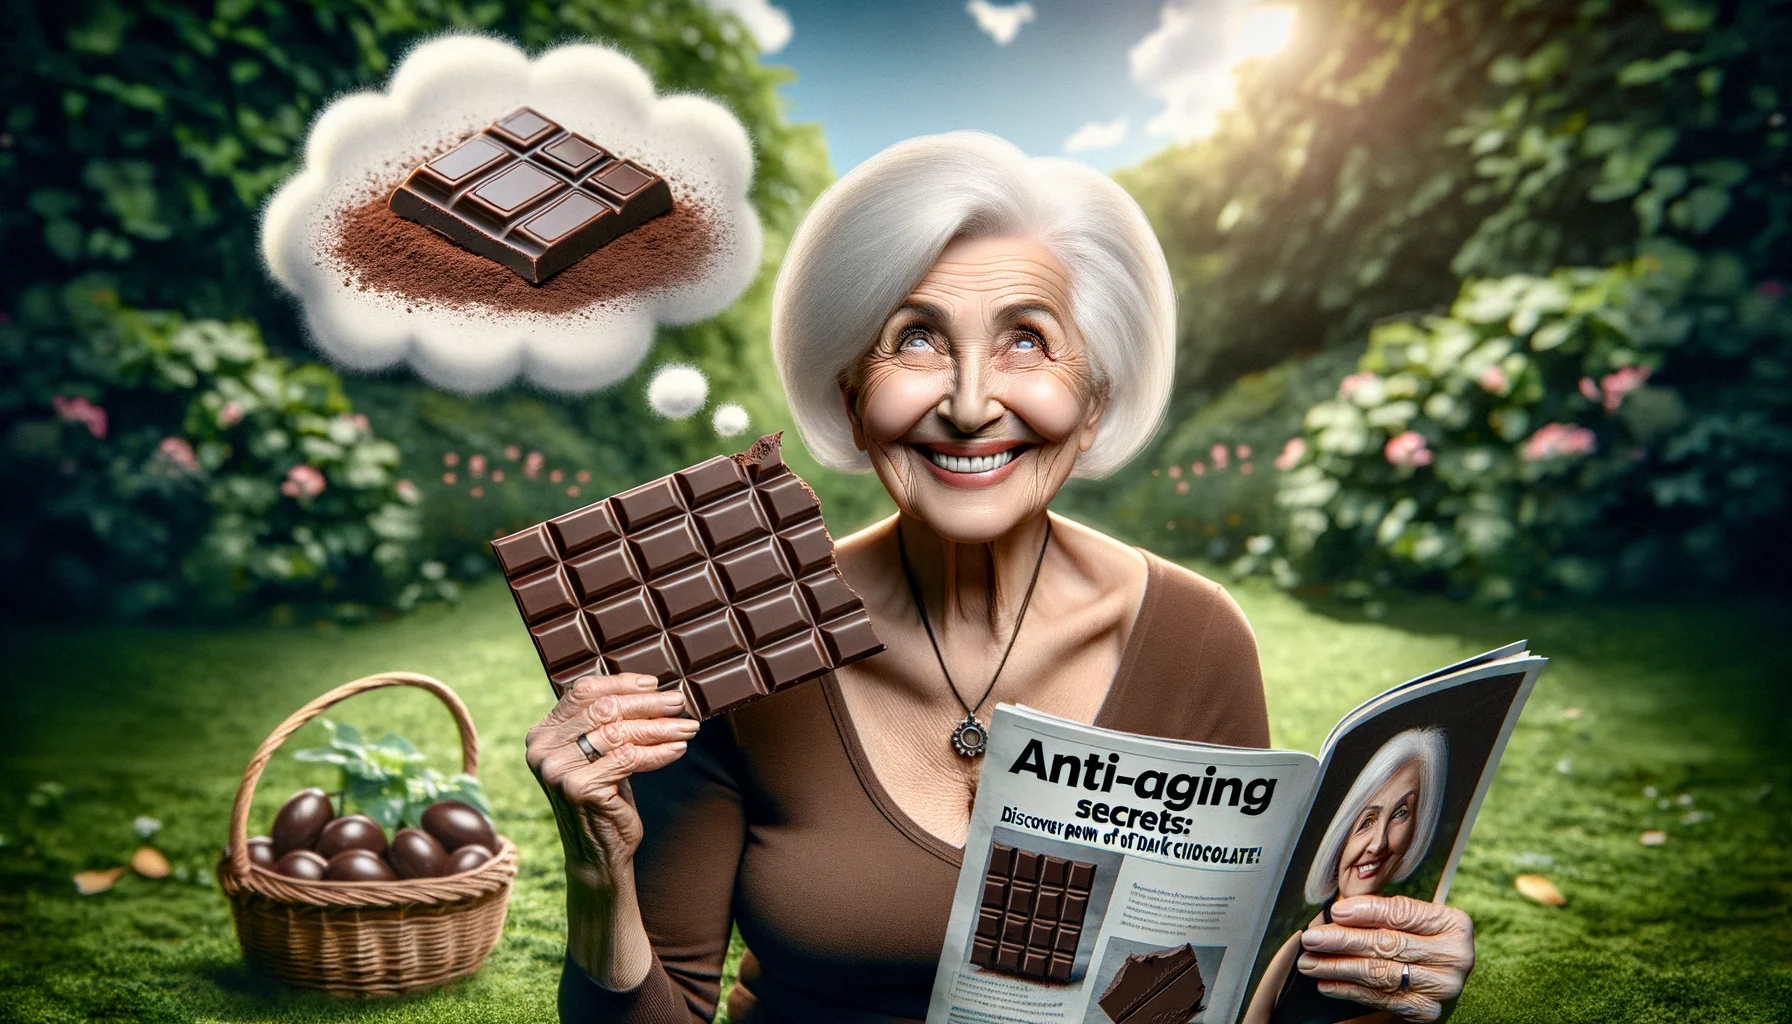 Create a humorous and realistic image, referring to the anti-aging benefits of dark chocolate. Imagine a smiling elderly Caucasian woman with robust health, sitting in a lush green garden. She holds a large piece of decadent dark chocolate in one hand and with the other, she's showing off a radiant and youthful looking skin. Lying next to her, an open magazine shows a headline that reads, 'Anti-aging secrets: Discover the power of dark chocolate!'. A thought bubble, indicating connection between her youthful appearance and dark chocolate, floats above her head.